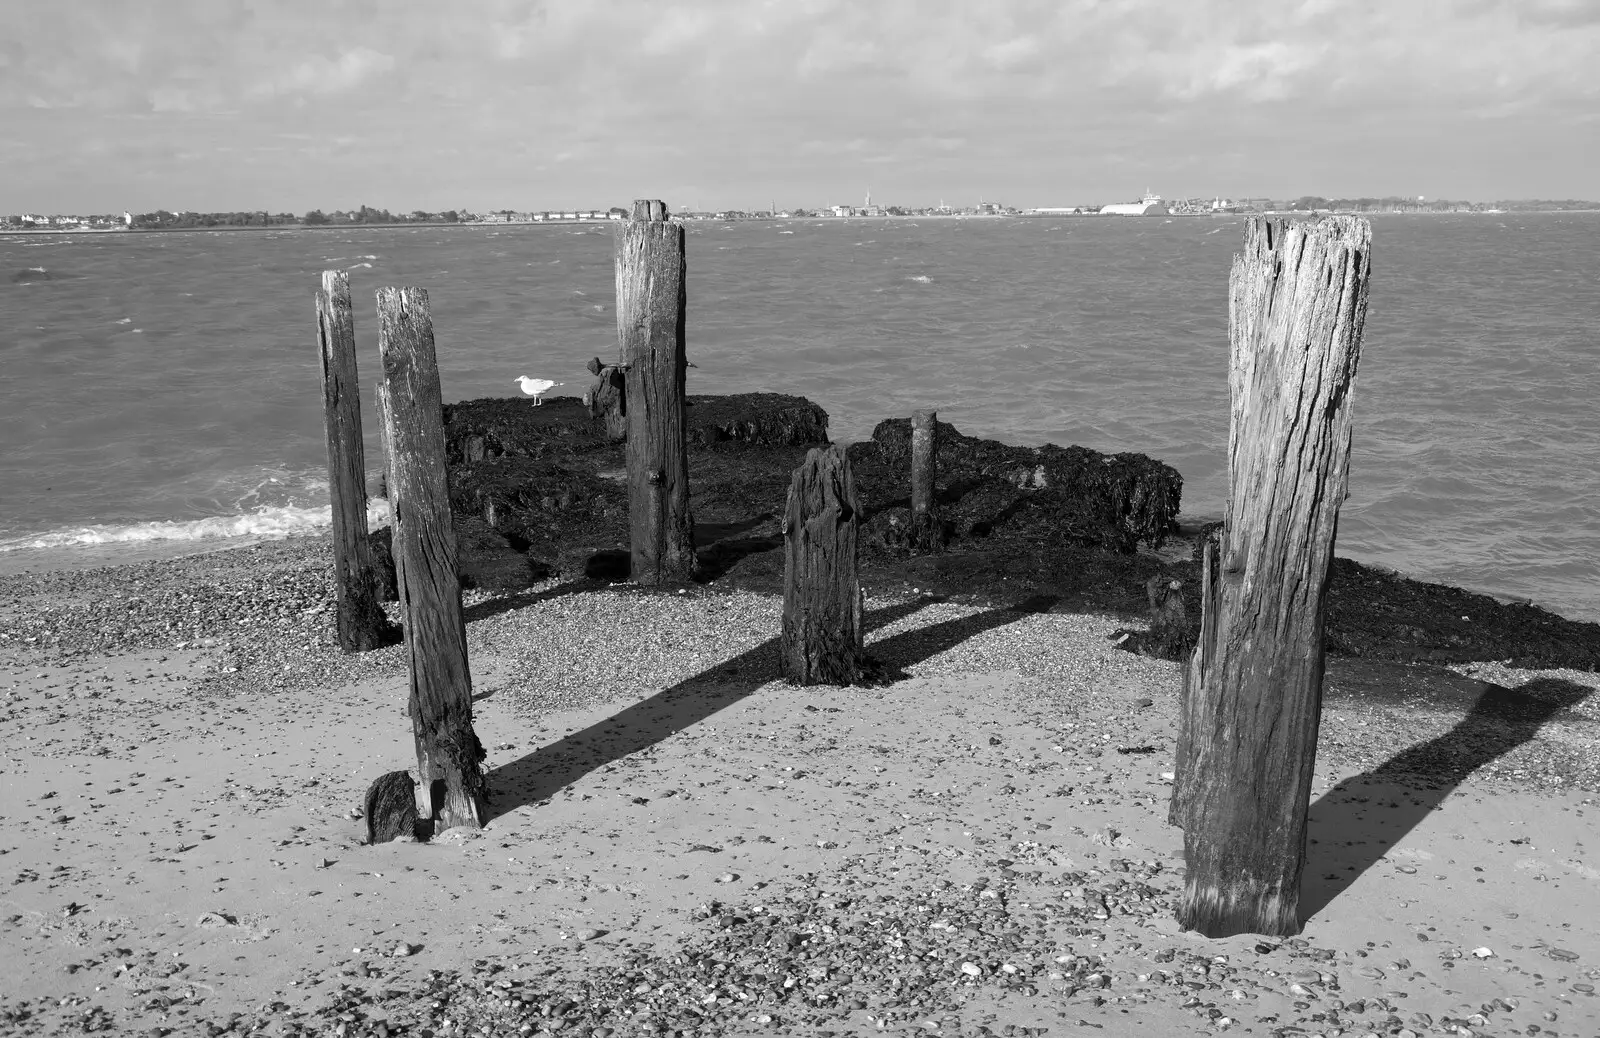 A collection of wooden stumps on the shore, from A Postcard from Felixstowe, Suffolk - 5th October 2022